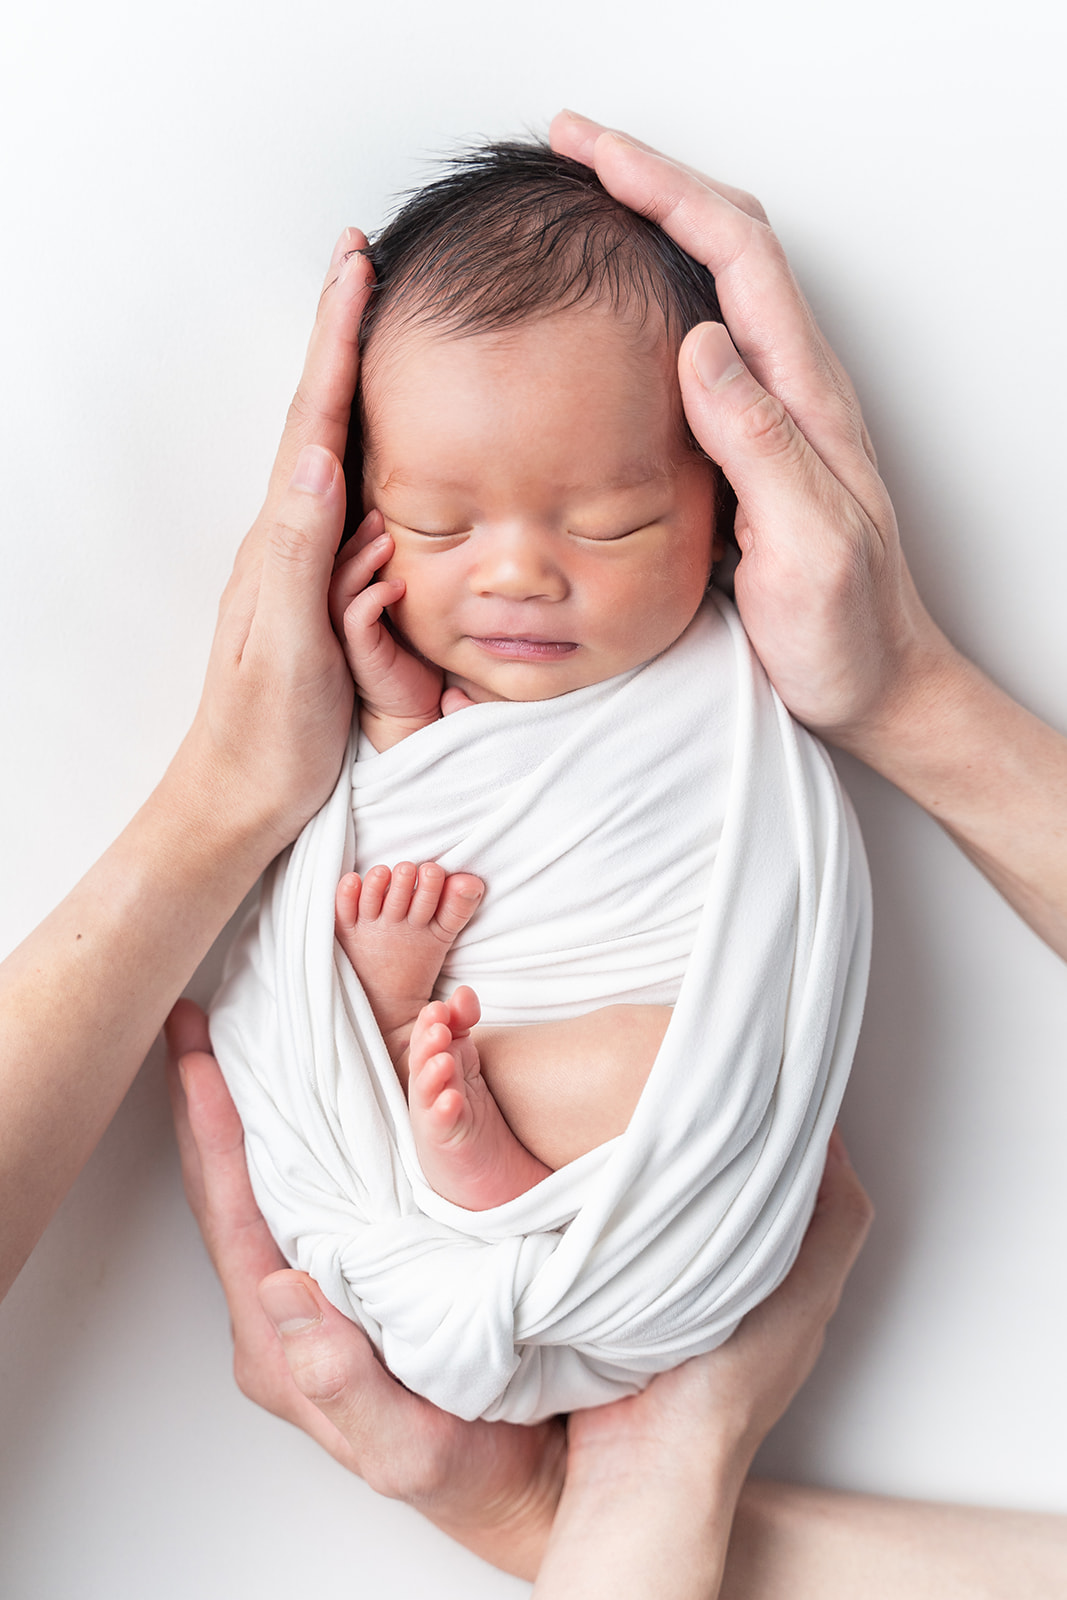 A newborn baby sleeps in a white swaddle while being cradled by parent's hands after using South Coast Midwifery